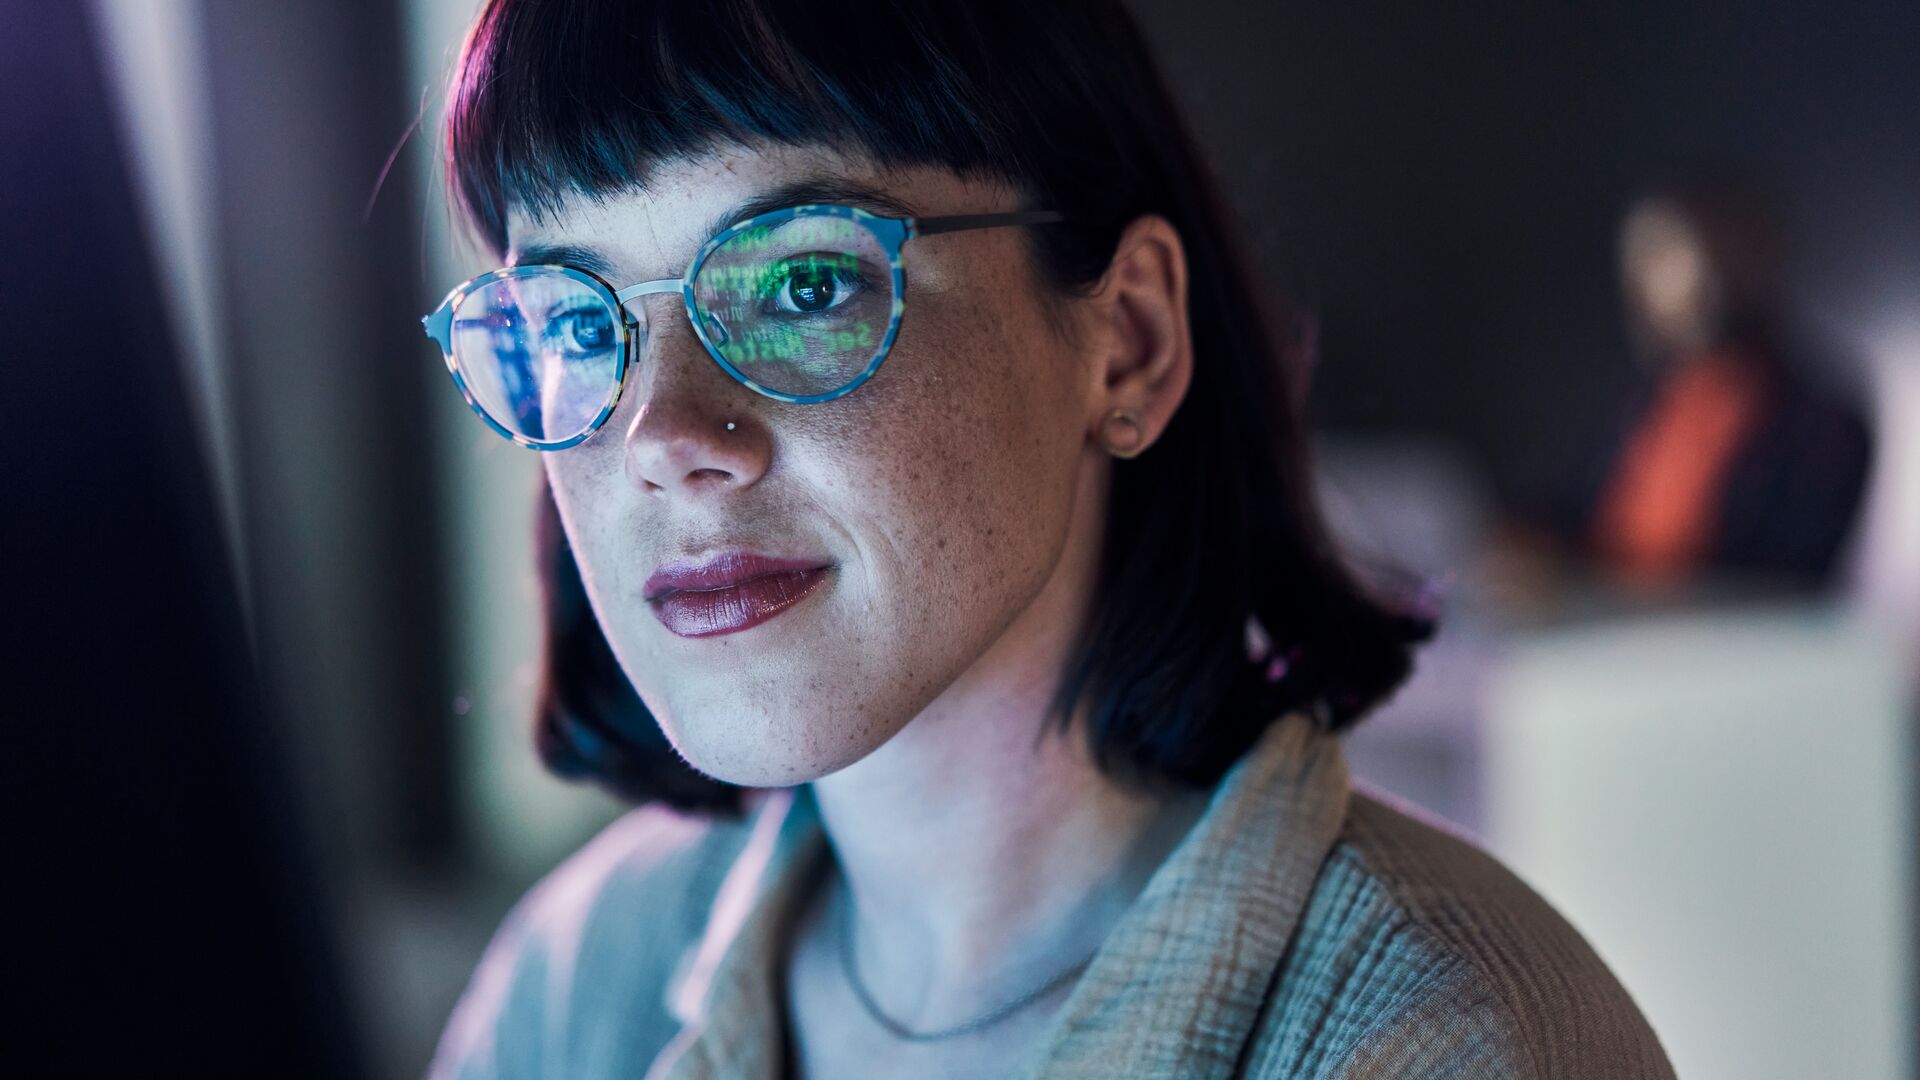 One's and zeros in green reflect against a woman's glasses who is looking intently in front of a screen with another woman in a similar position in the background out of focus.